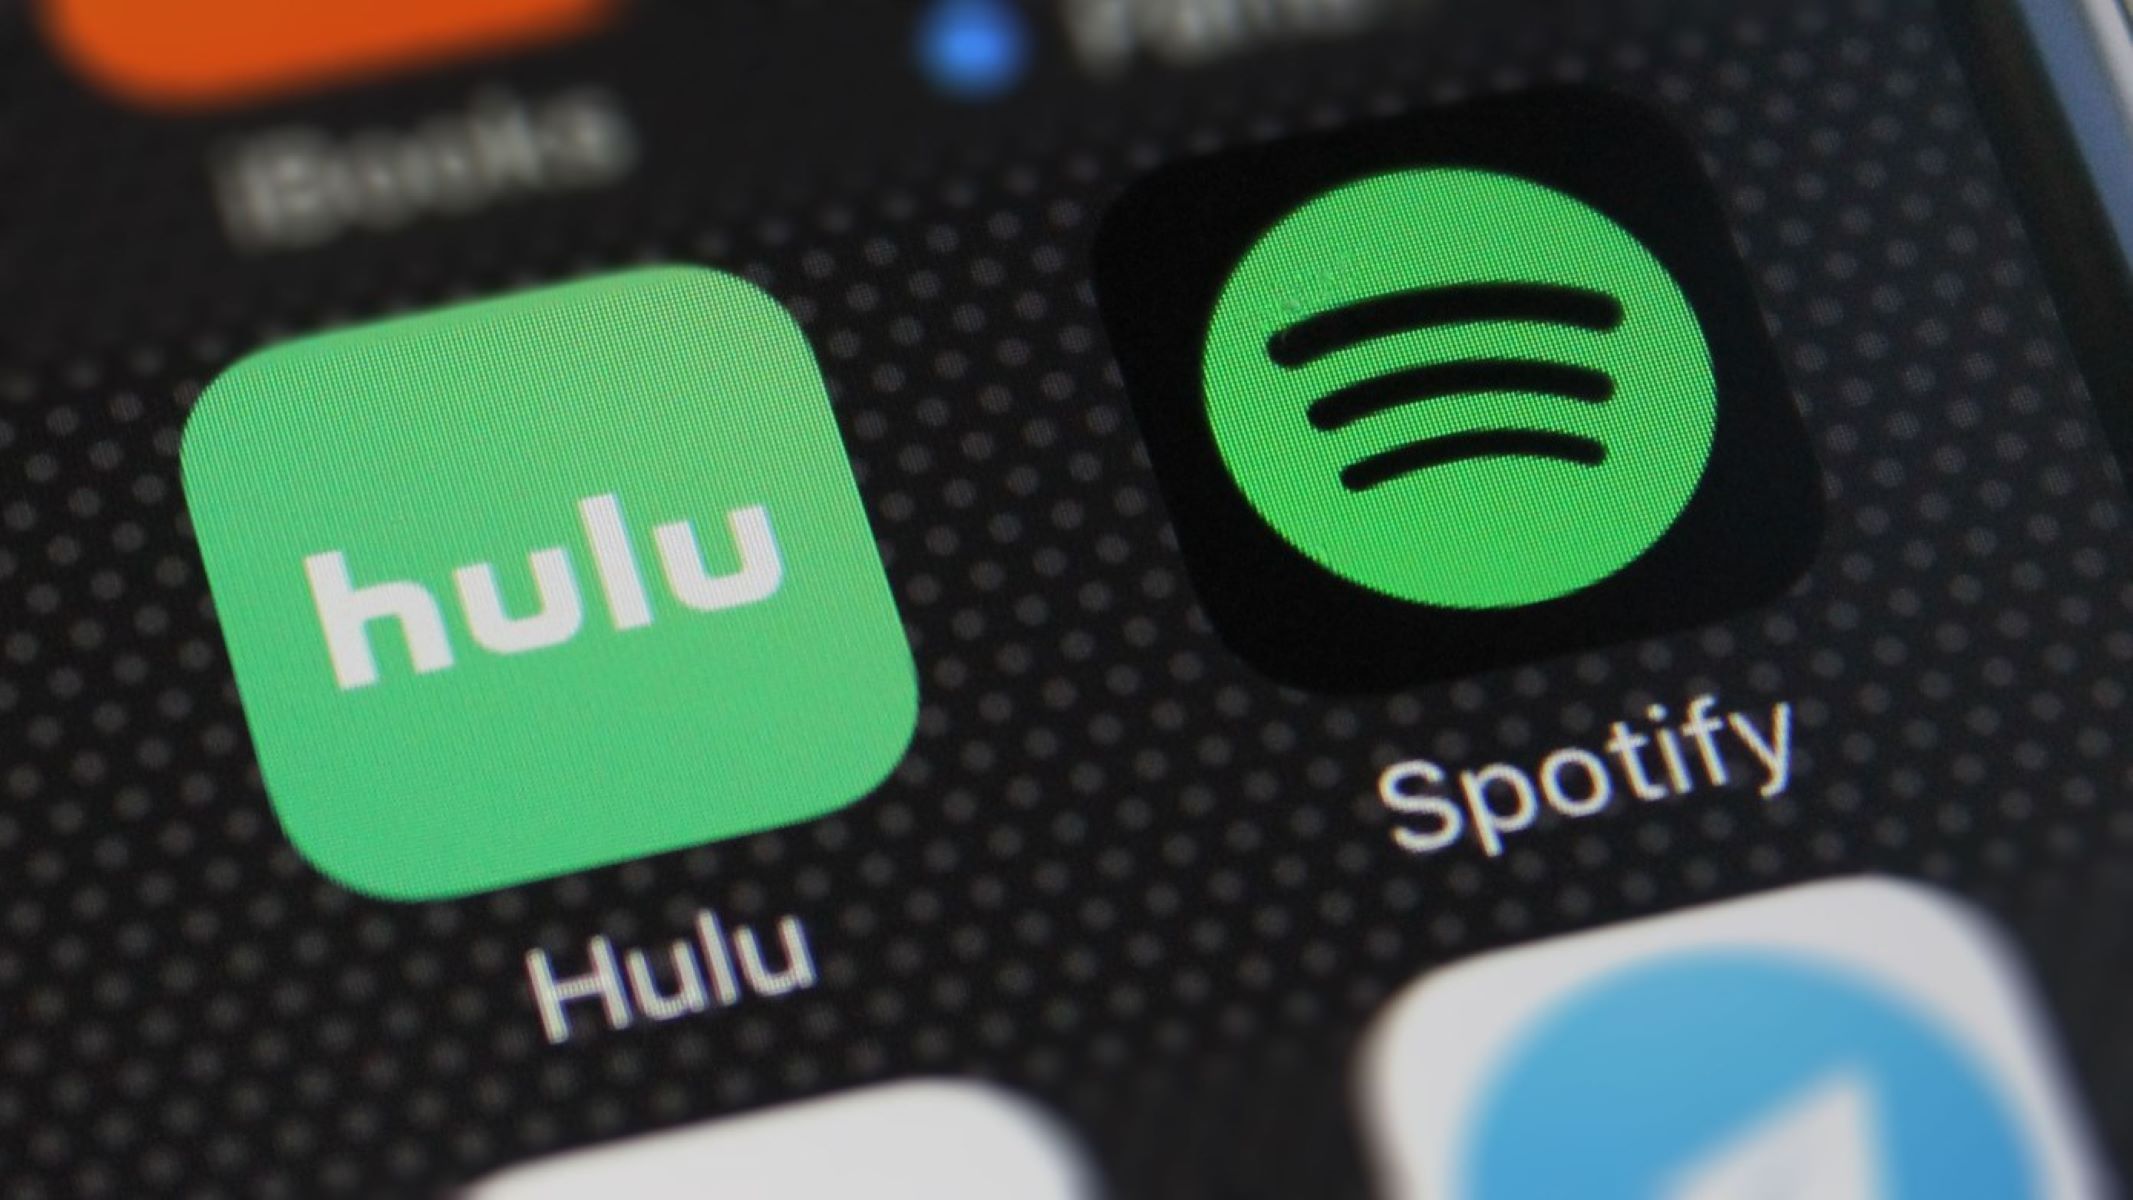 How To Log In To Hulu With Spotify